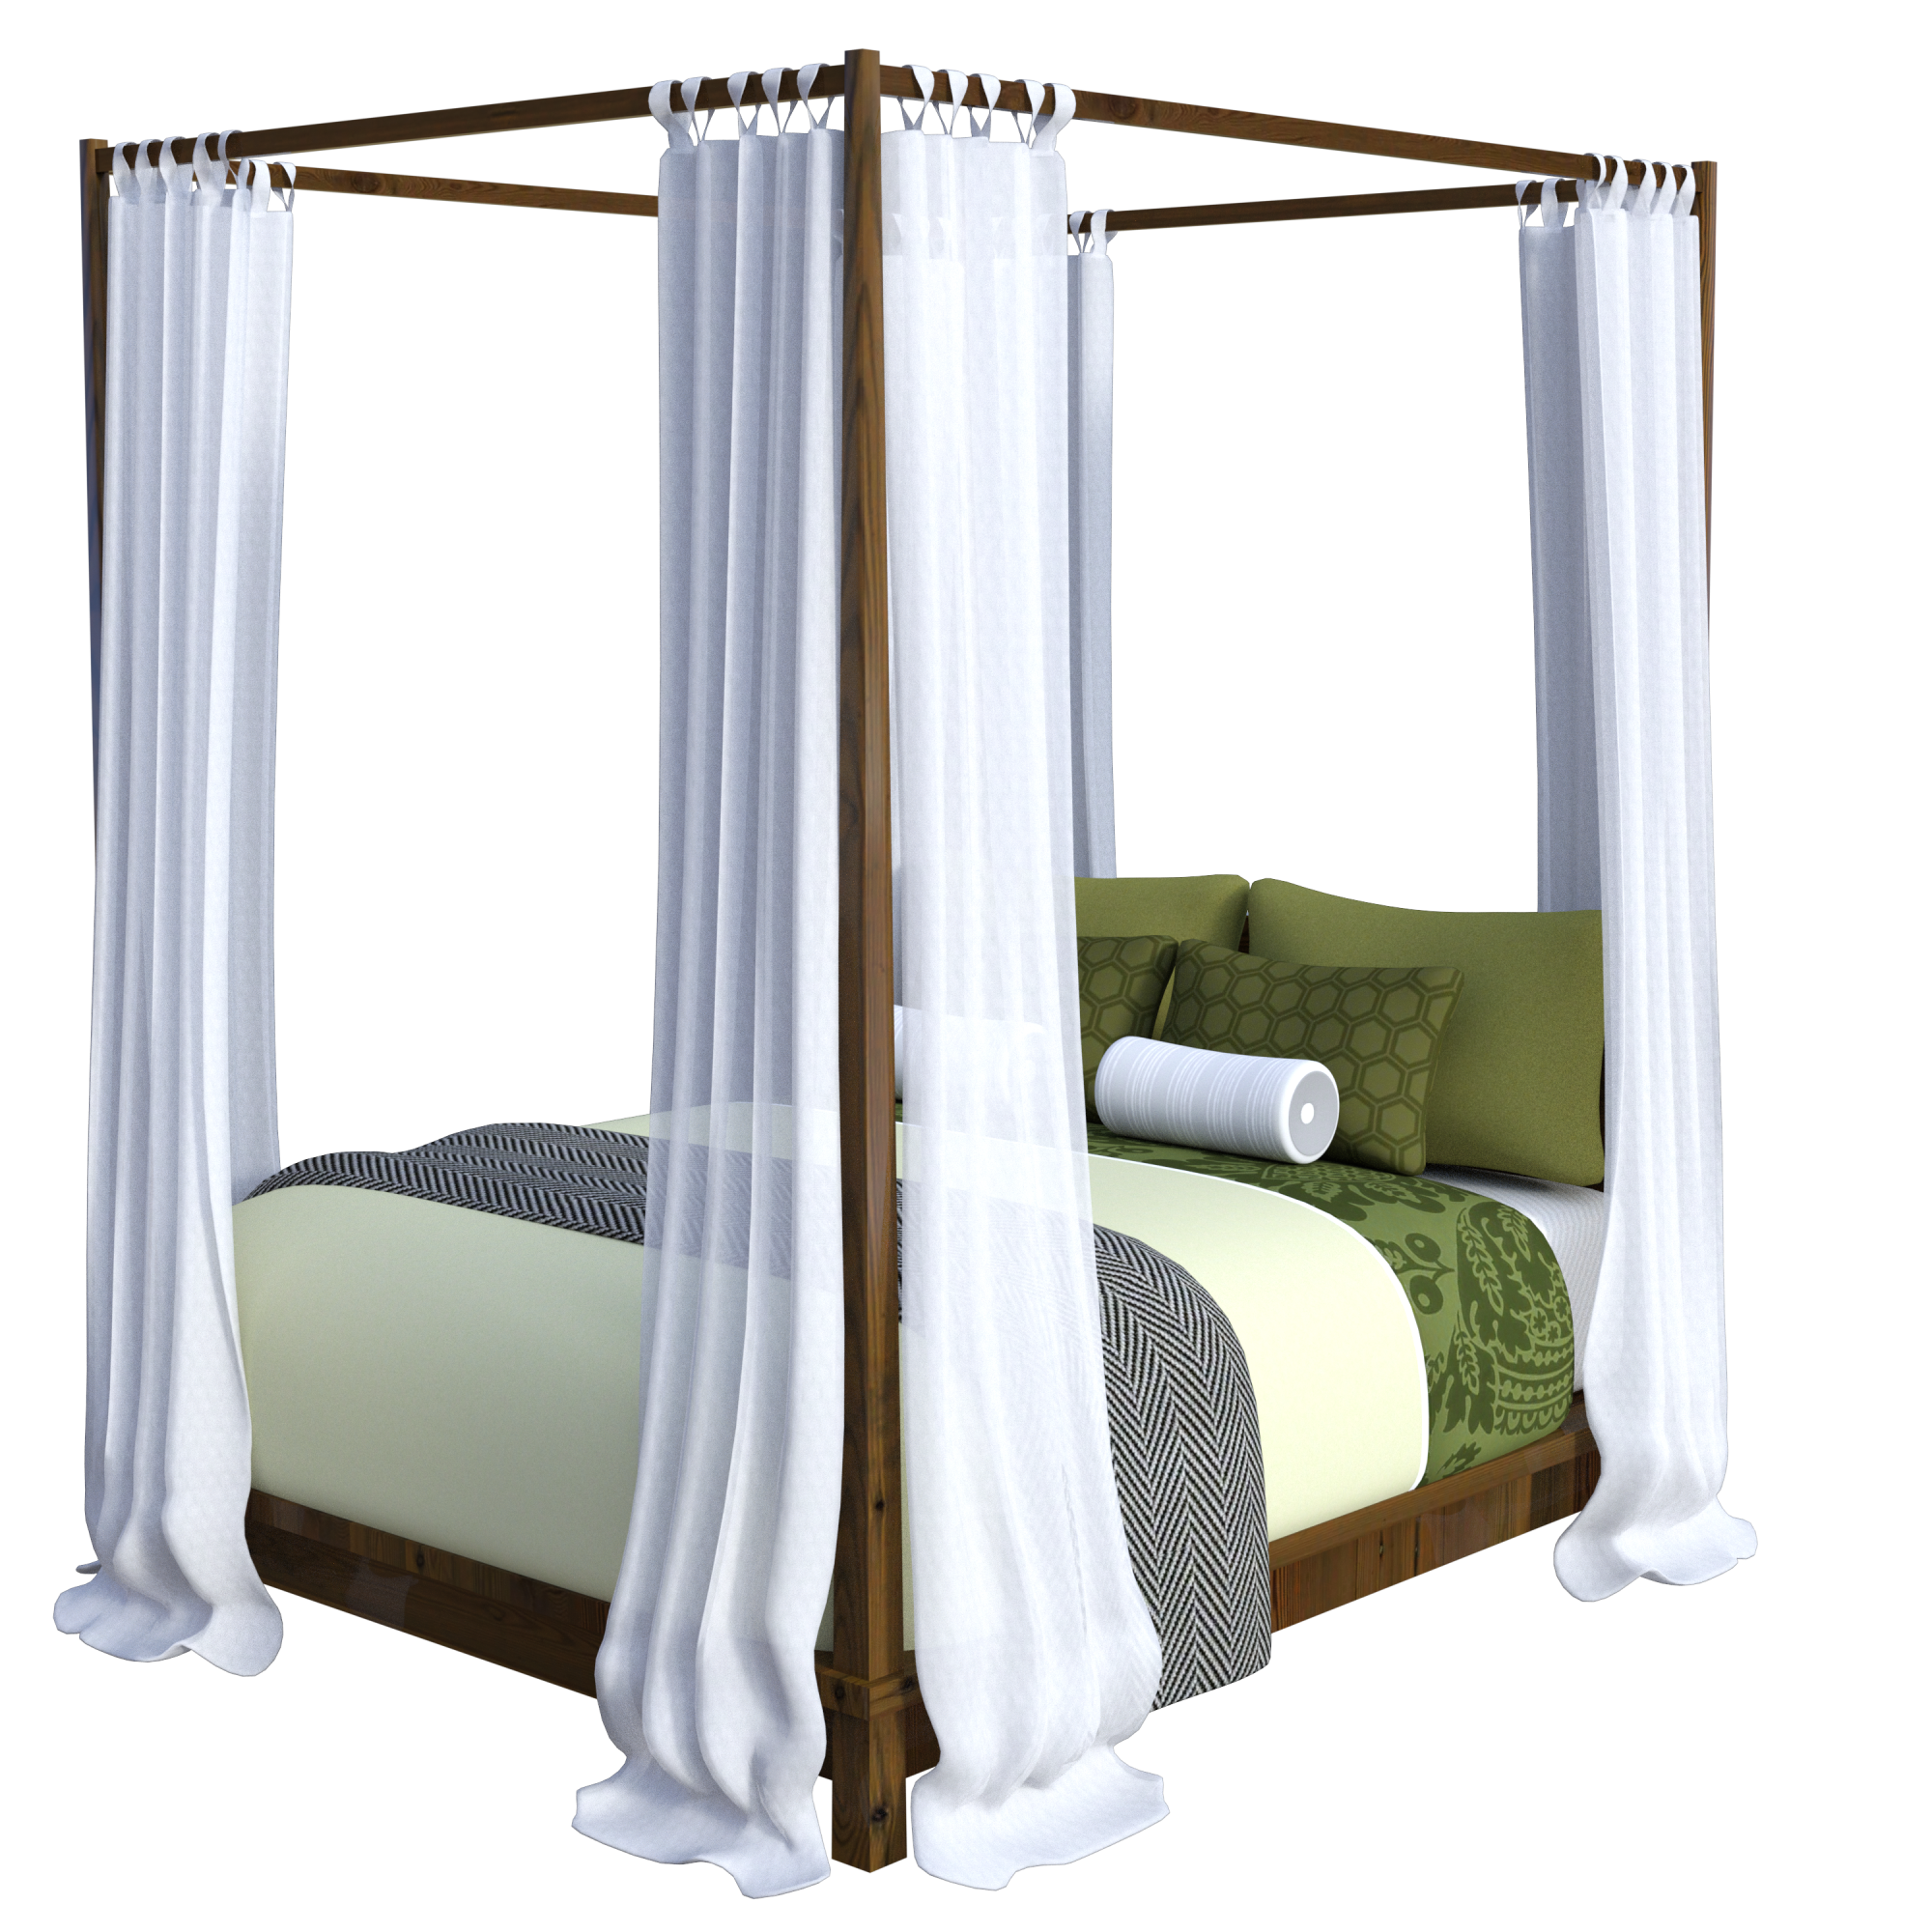 Bed Canopy Benefits